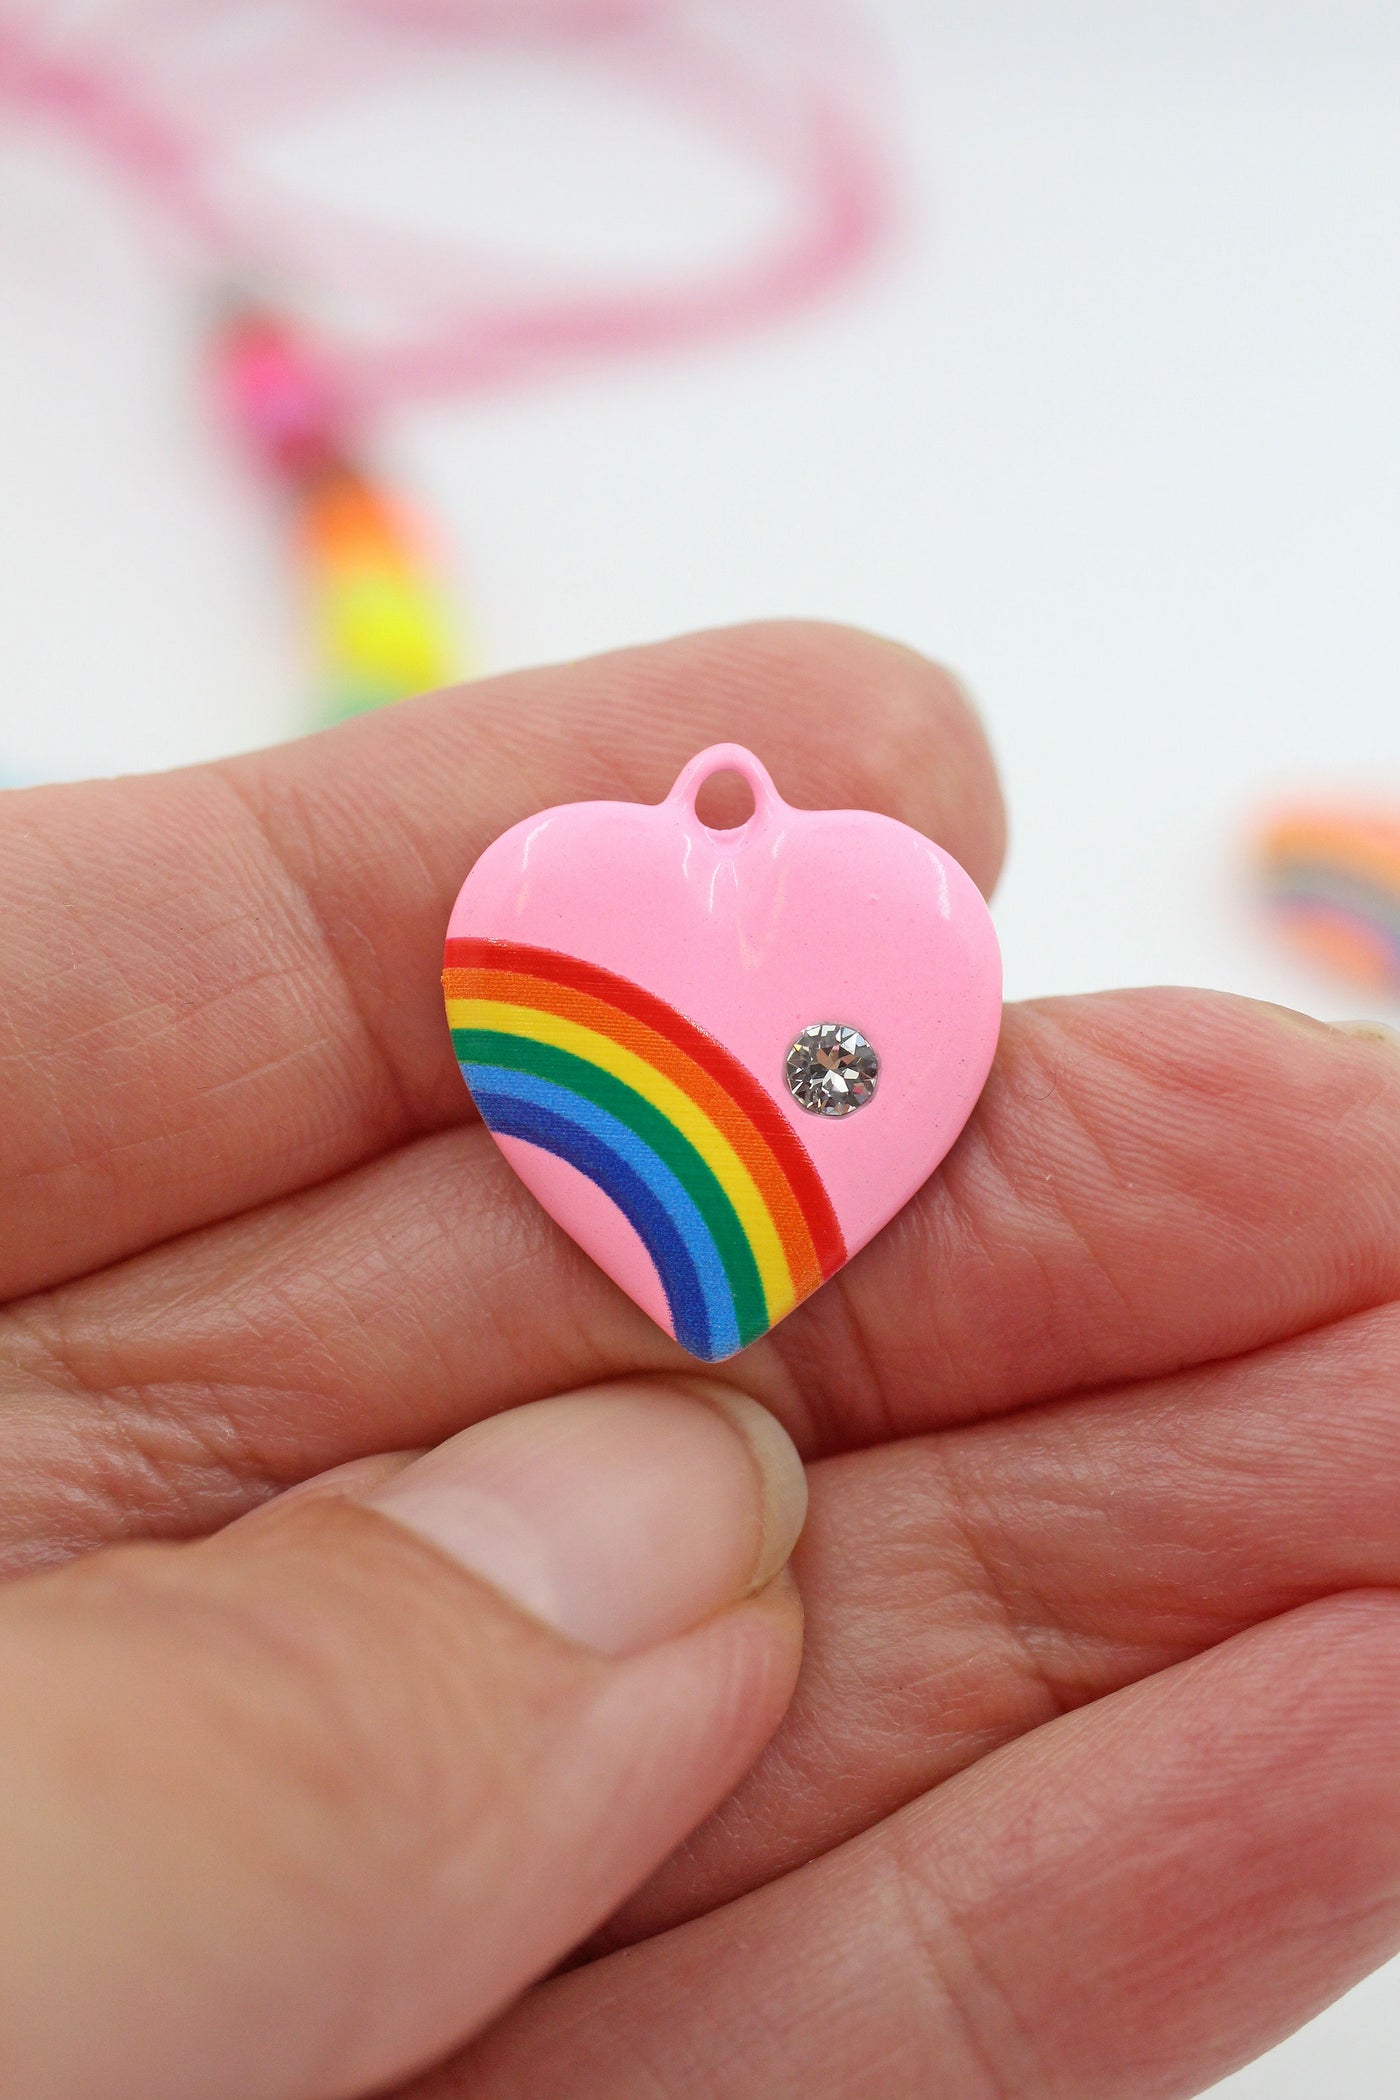 Pink Rainbow Heart Charm with crystal, from WomanShopsWorld